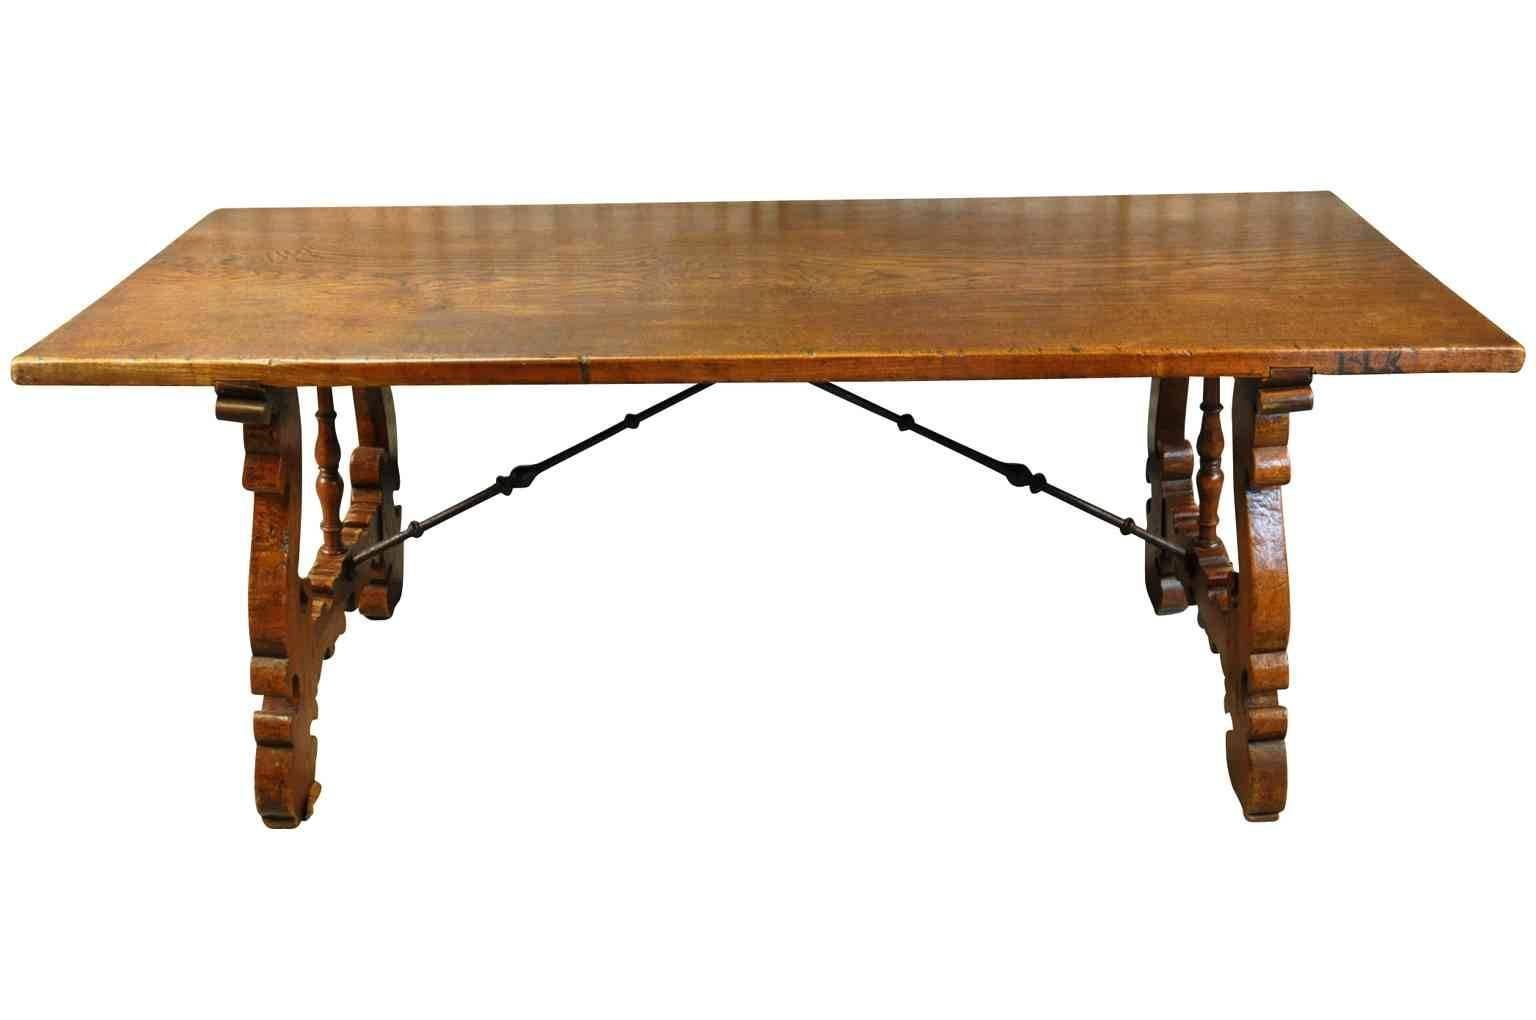 A very handsome 19th century Spanish farm table - trestle table. Beautifully constructed from chestnut and hand-forged iron stretchers. The top surface is a solid board! The patina and tone is rich and luminous.